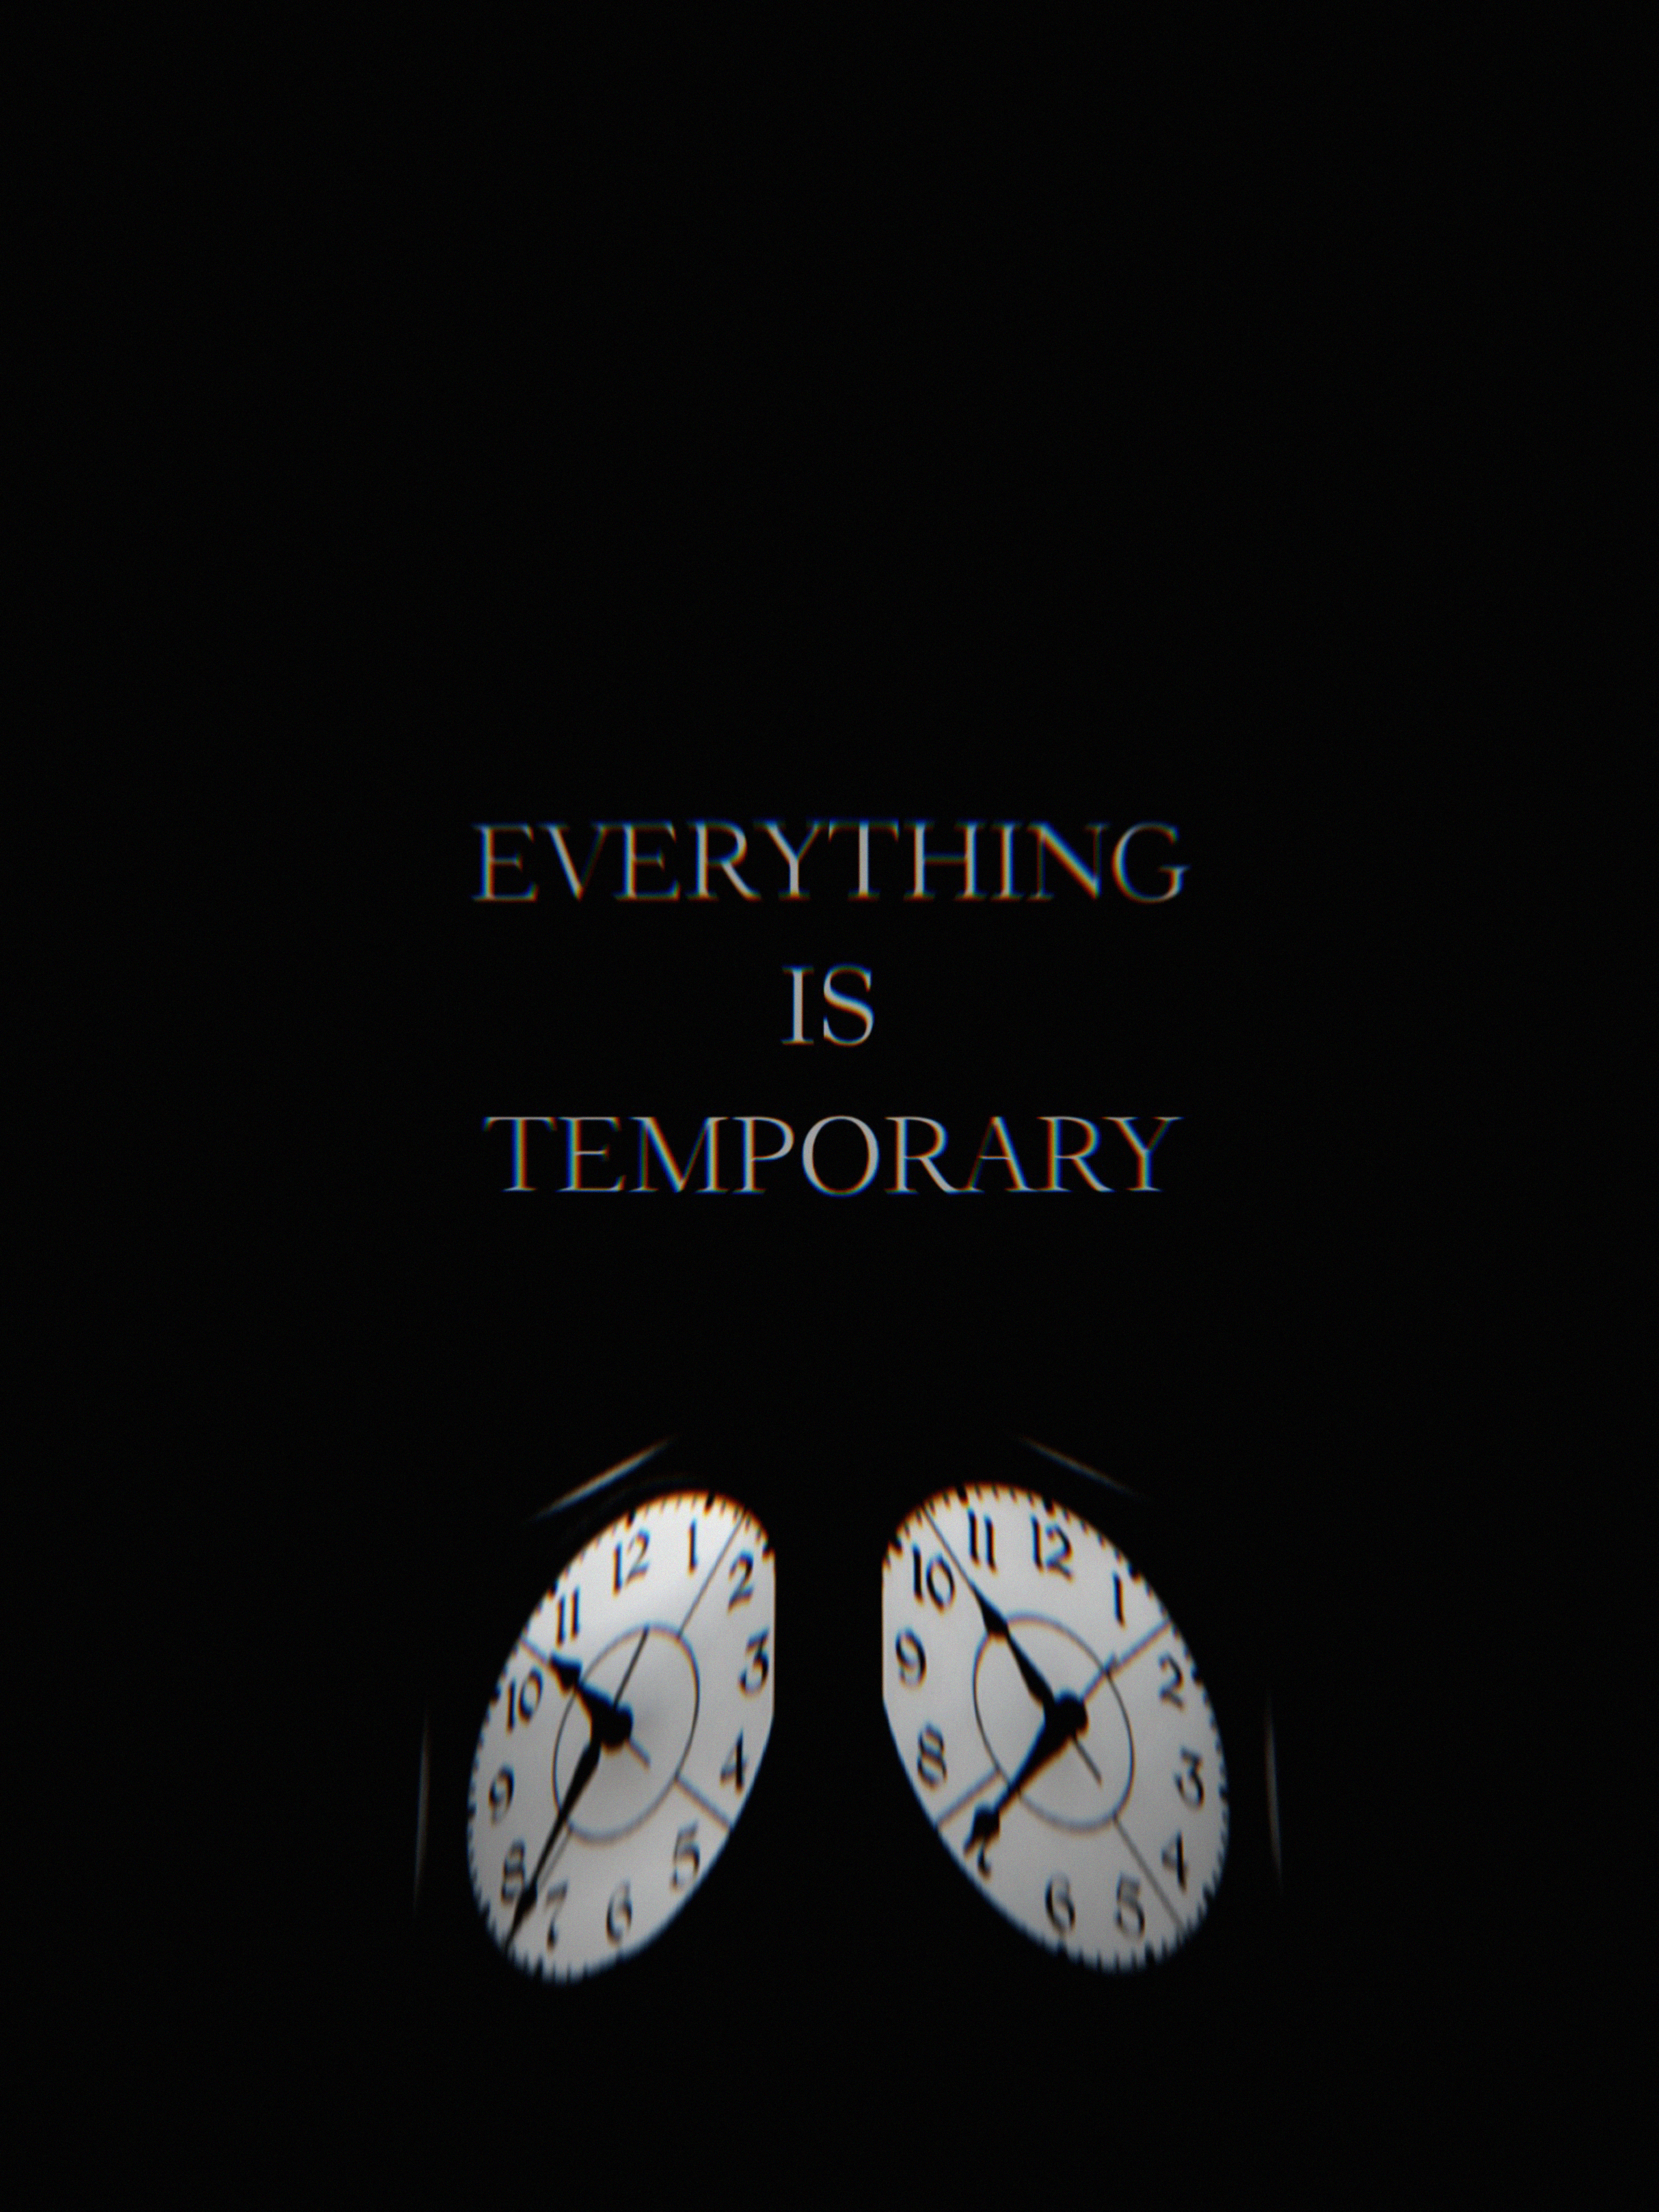 life, it's time, words, clock, time, glitch, temporary